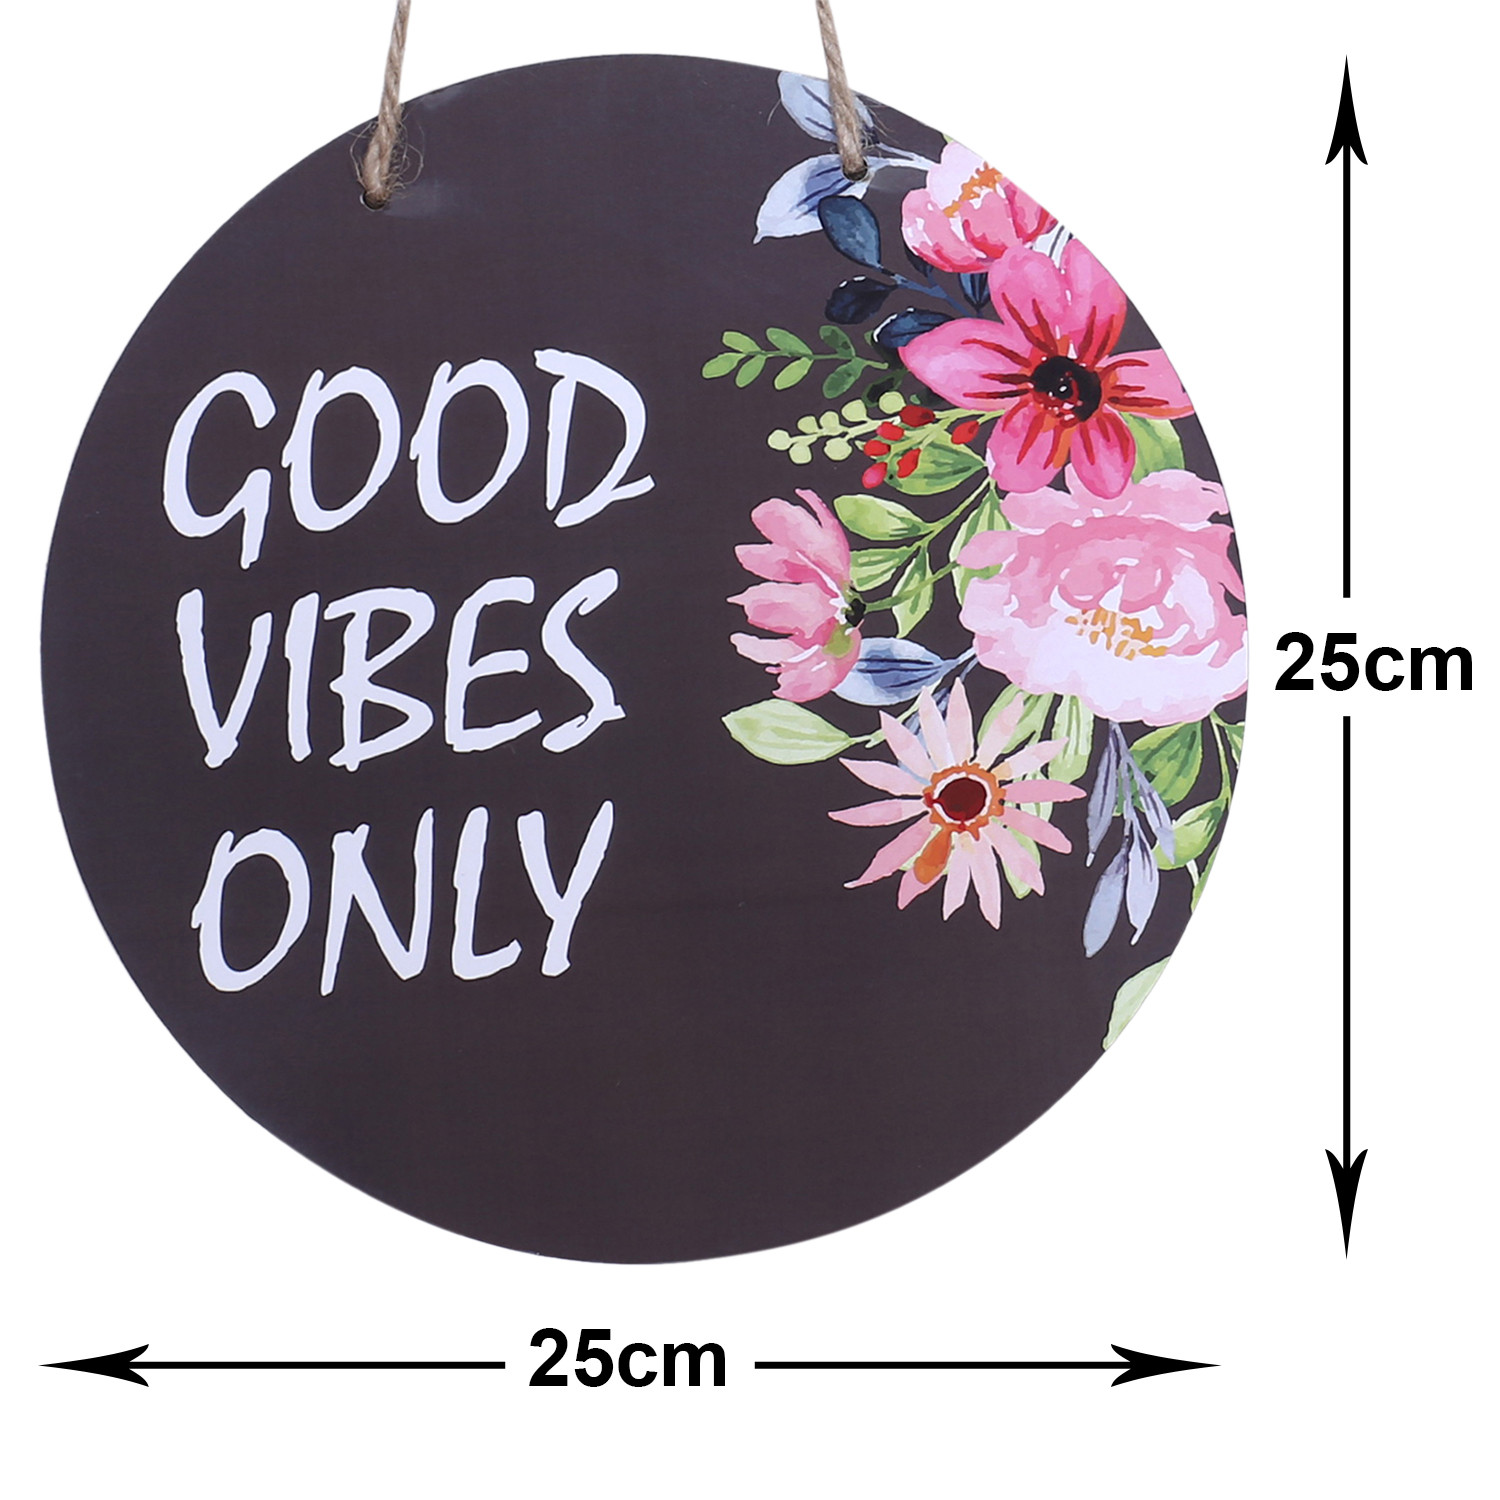 Kuber Industries Wall Hanging Quotes|Mdf Wooden Round Shaped Flower Print Plates For Kids Bedroom,Hall Entrance,Office (Black)